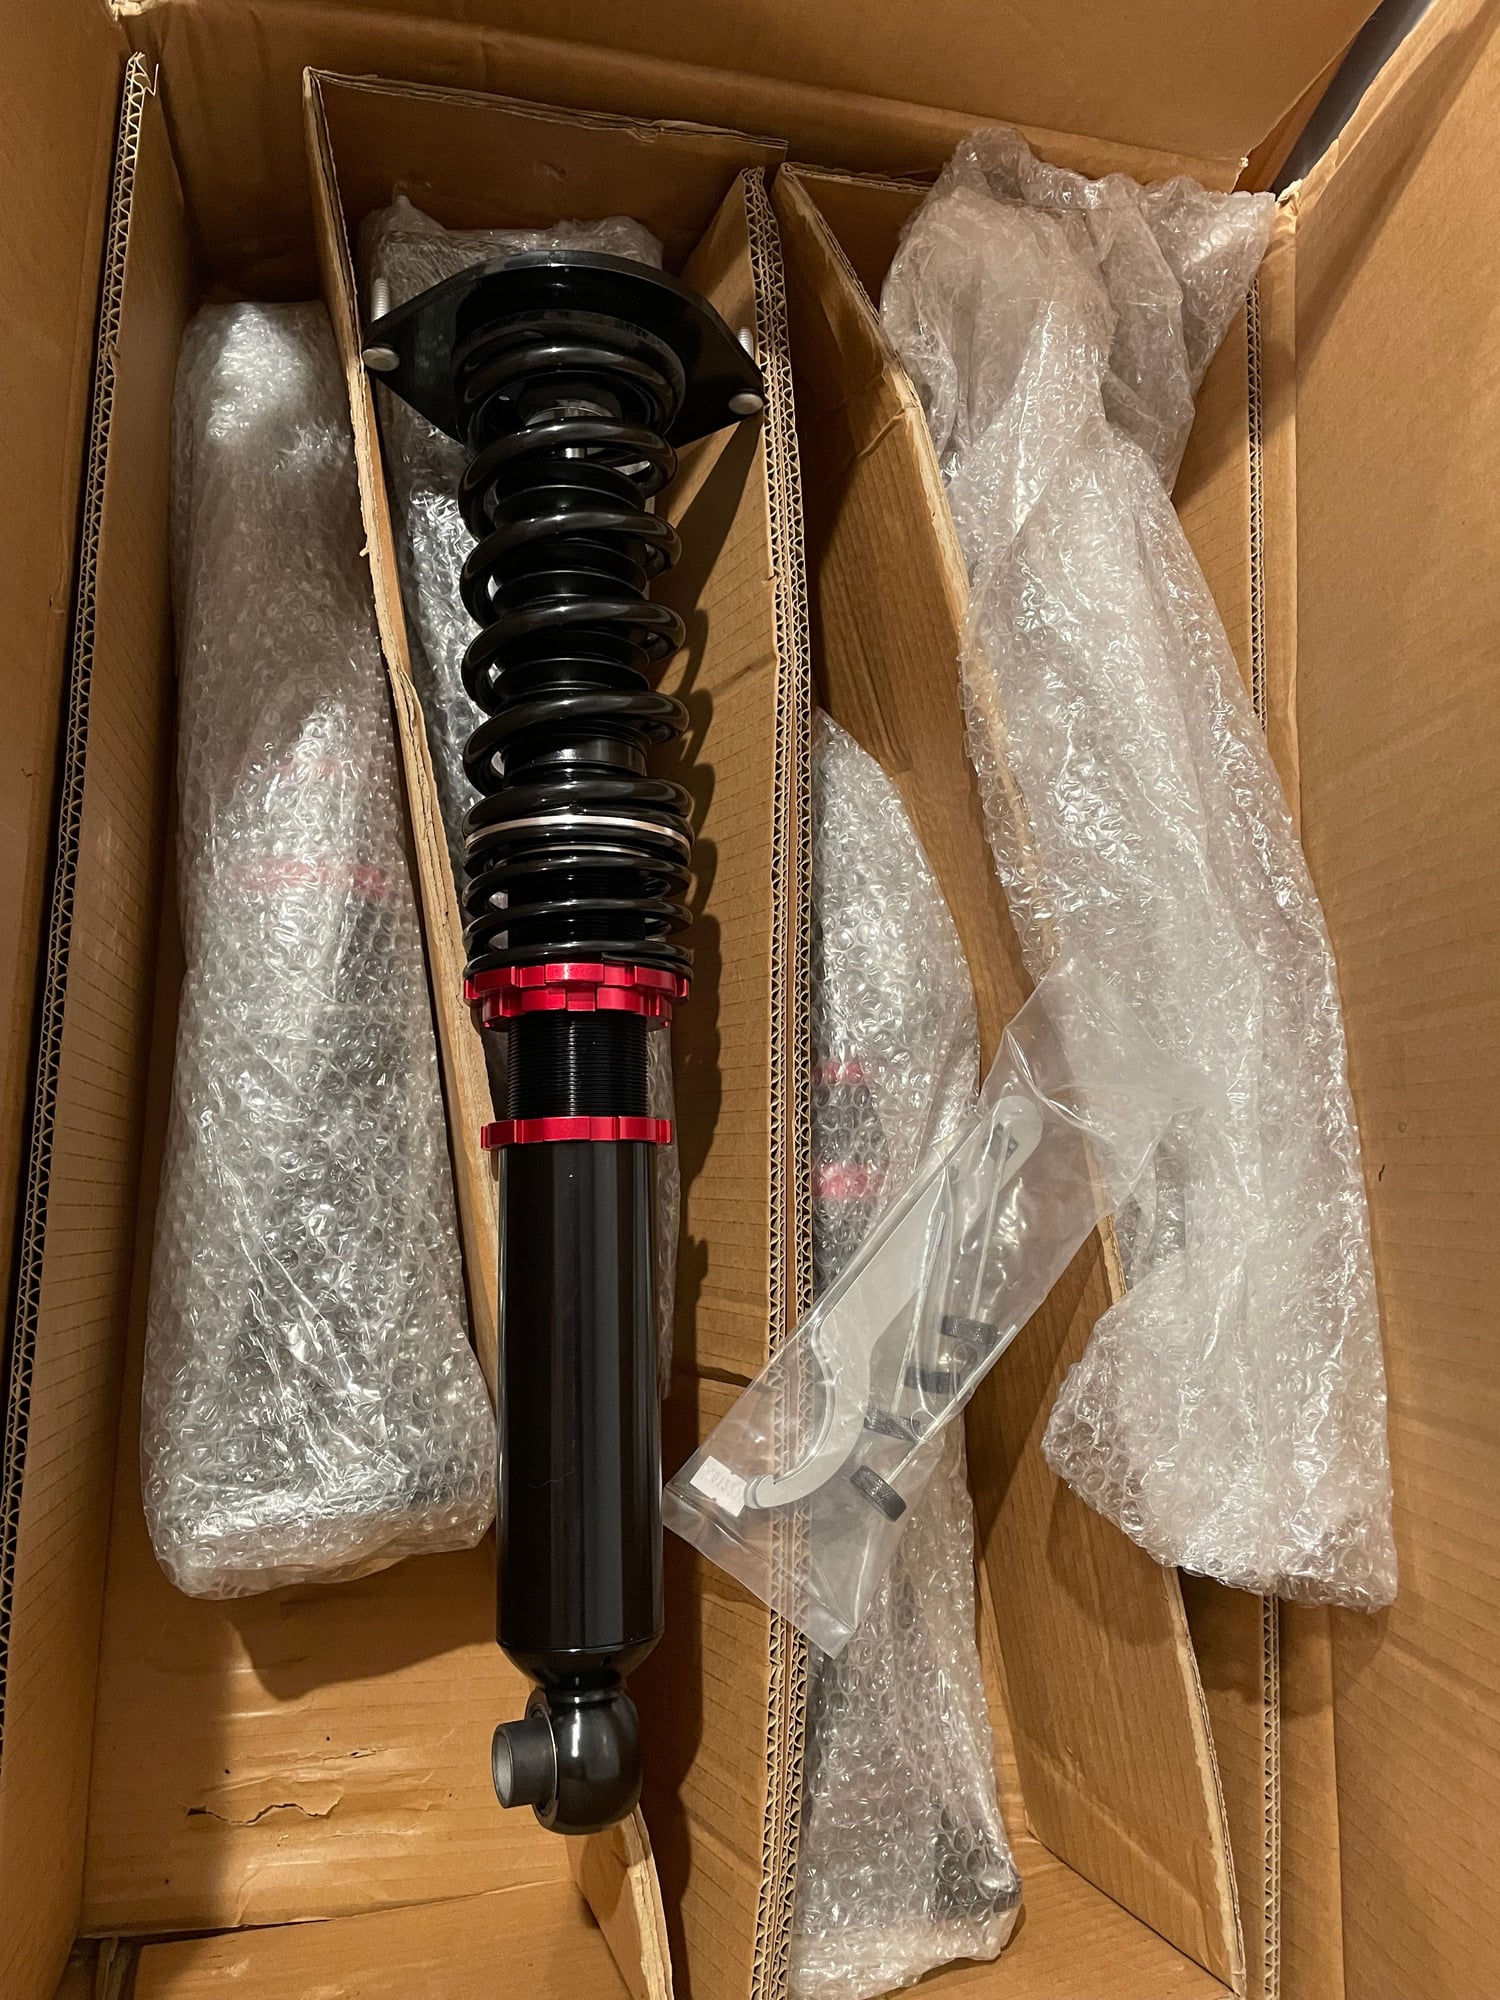 Steering/Suspension - RX7 FC3S Ceika Coilovers - New - Honolulu, HI 96816, United States